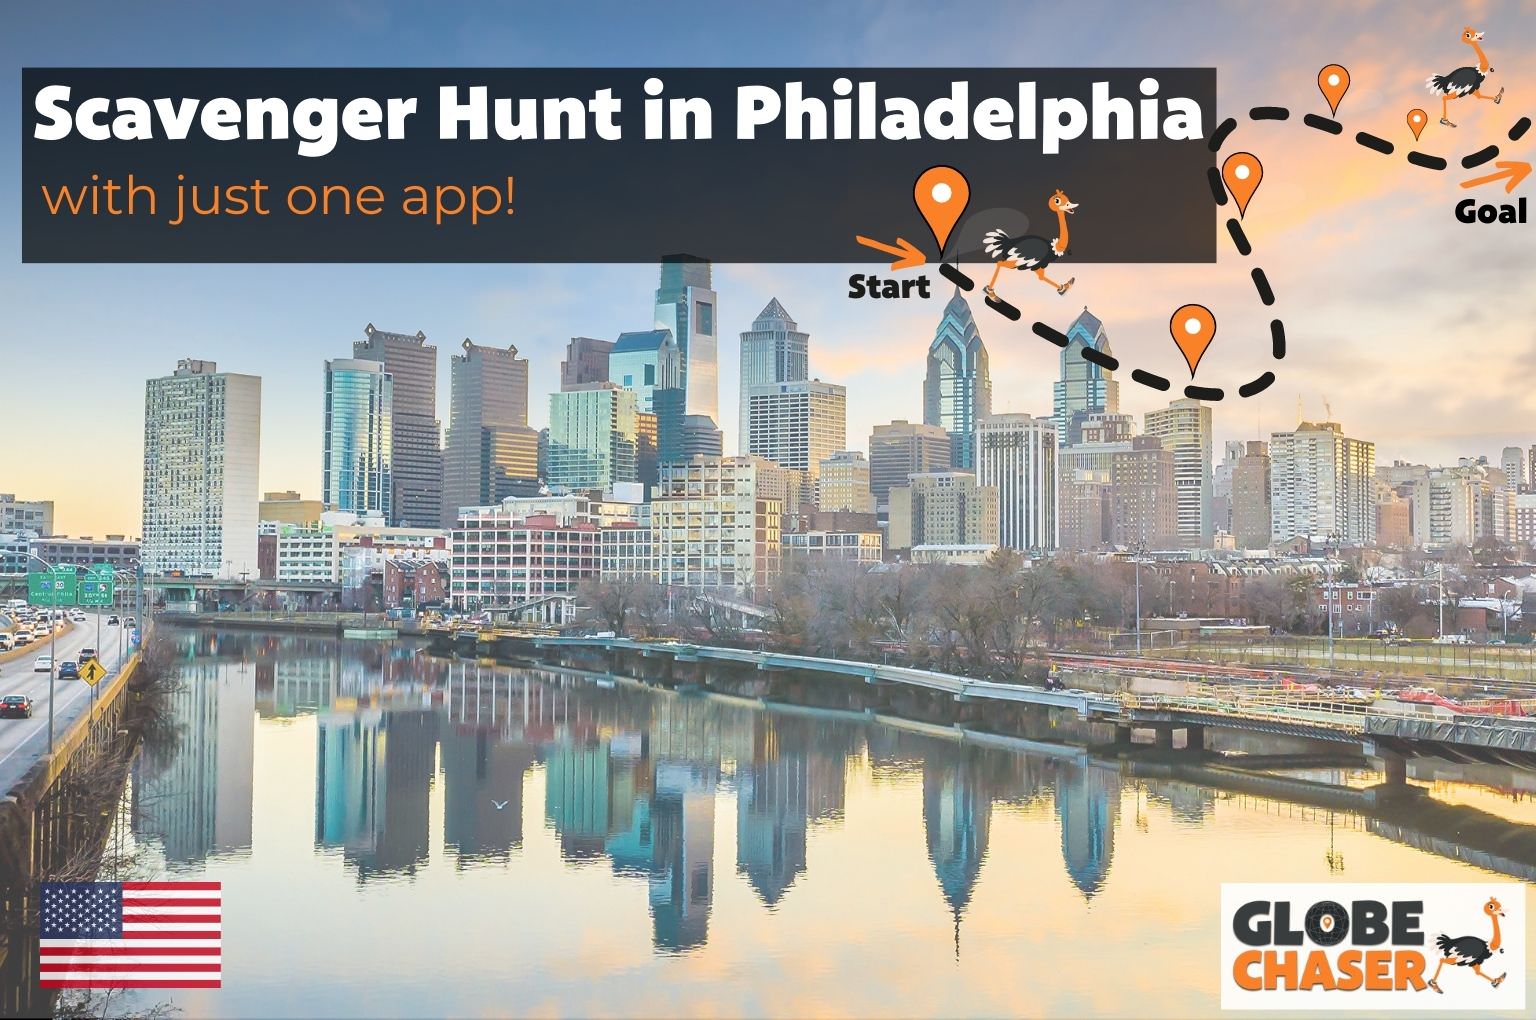 Scavenger Hunt in Philadelphia, USA - Family Activities with the Globe Chaser App for Outdoor Fun